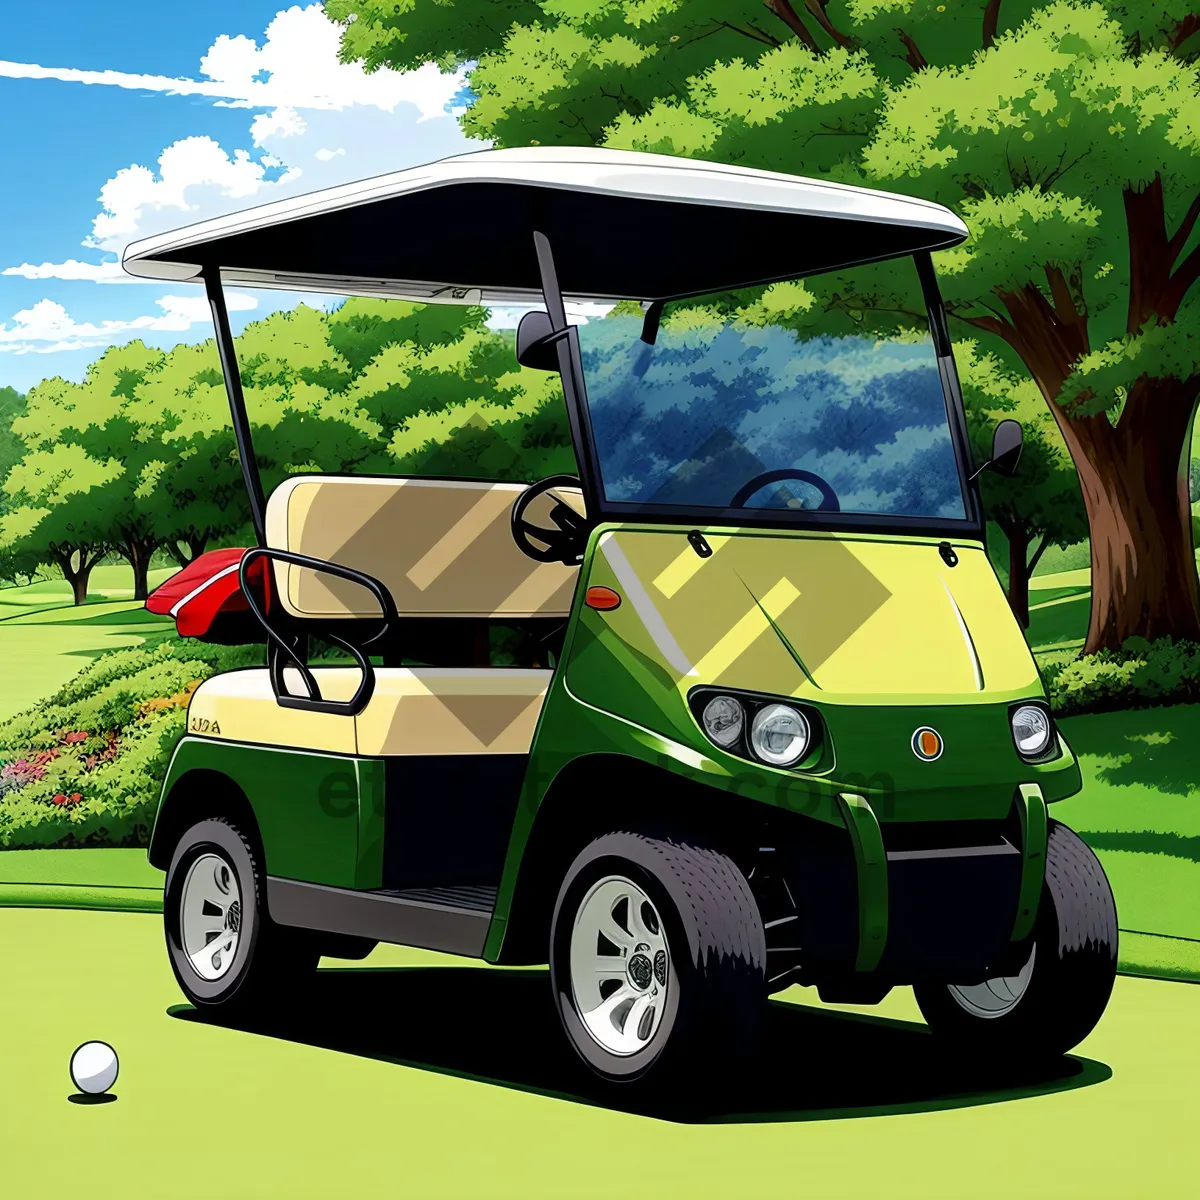 Picture of Golf Cart on Green Grass